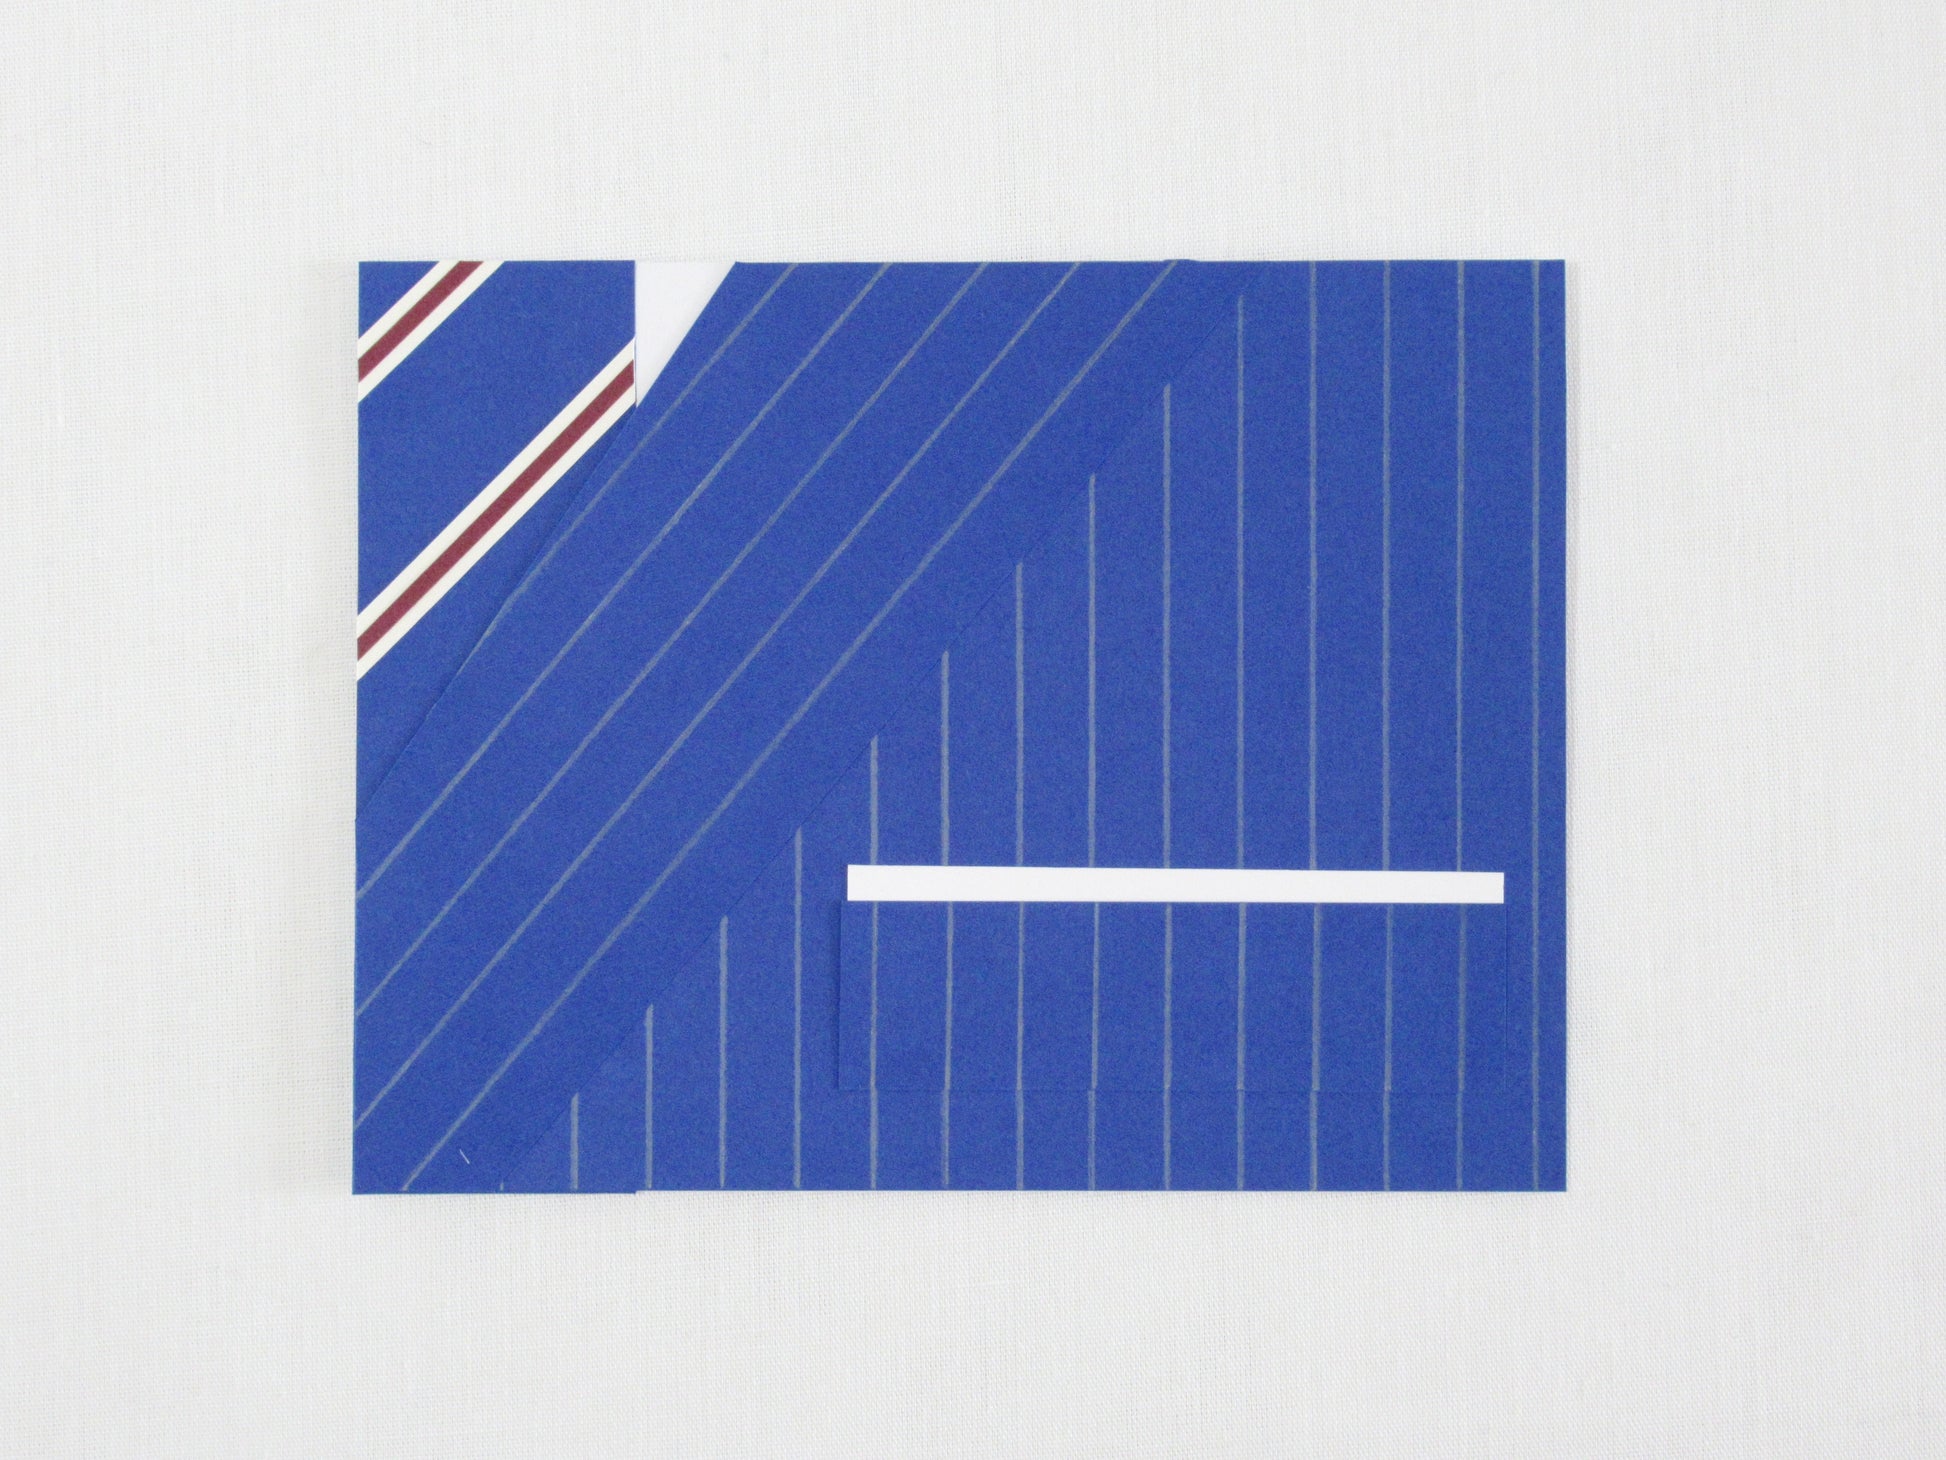 A card lays a white desk. The front of the card looks like a portion of person's suit, blue pinstripes, white pocket square, and a blue striped tie. It's designed to look like an outfit worn by Harry Hart in the movie Kingsman: The Secret Service.